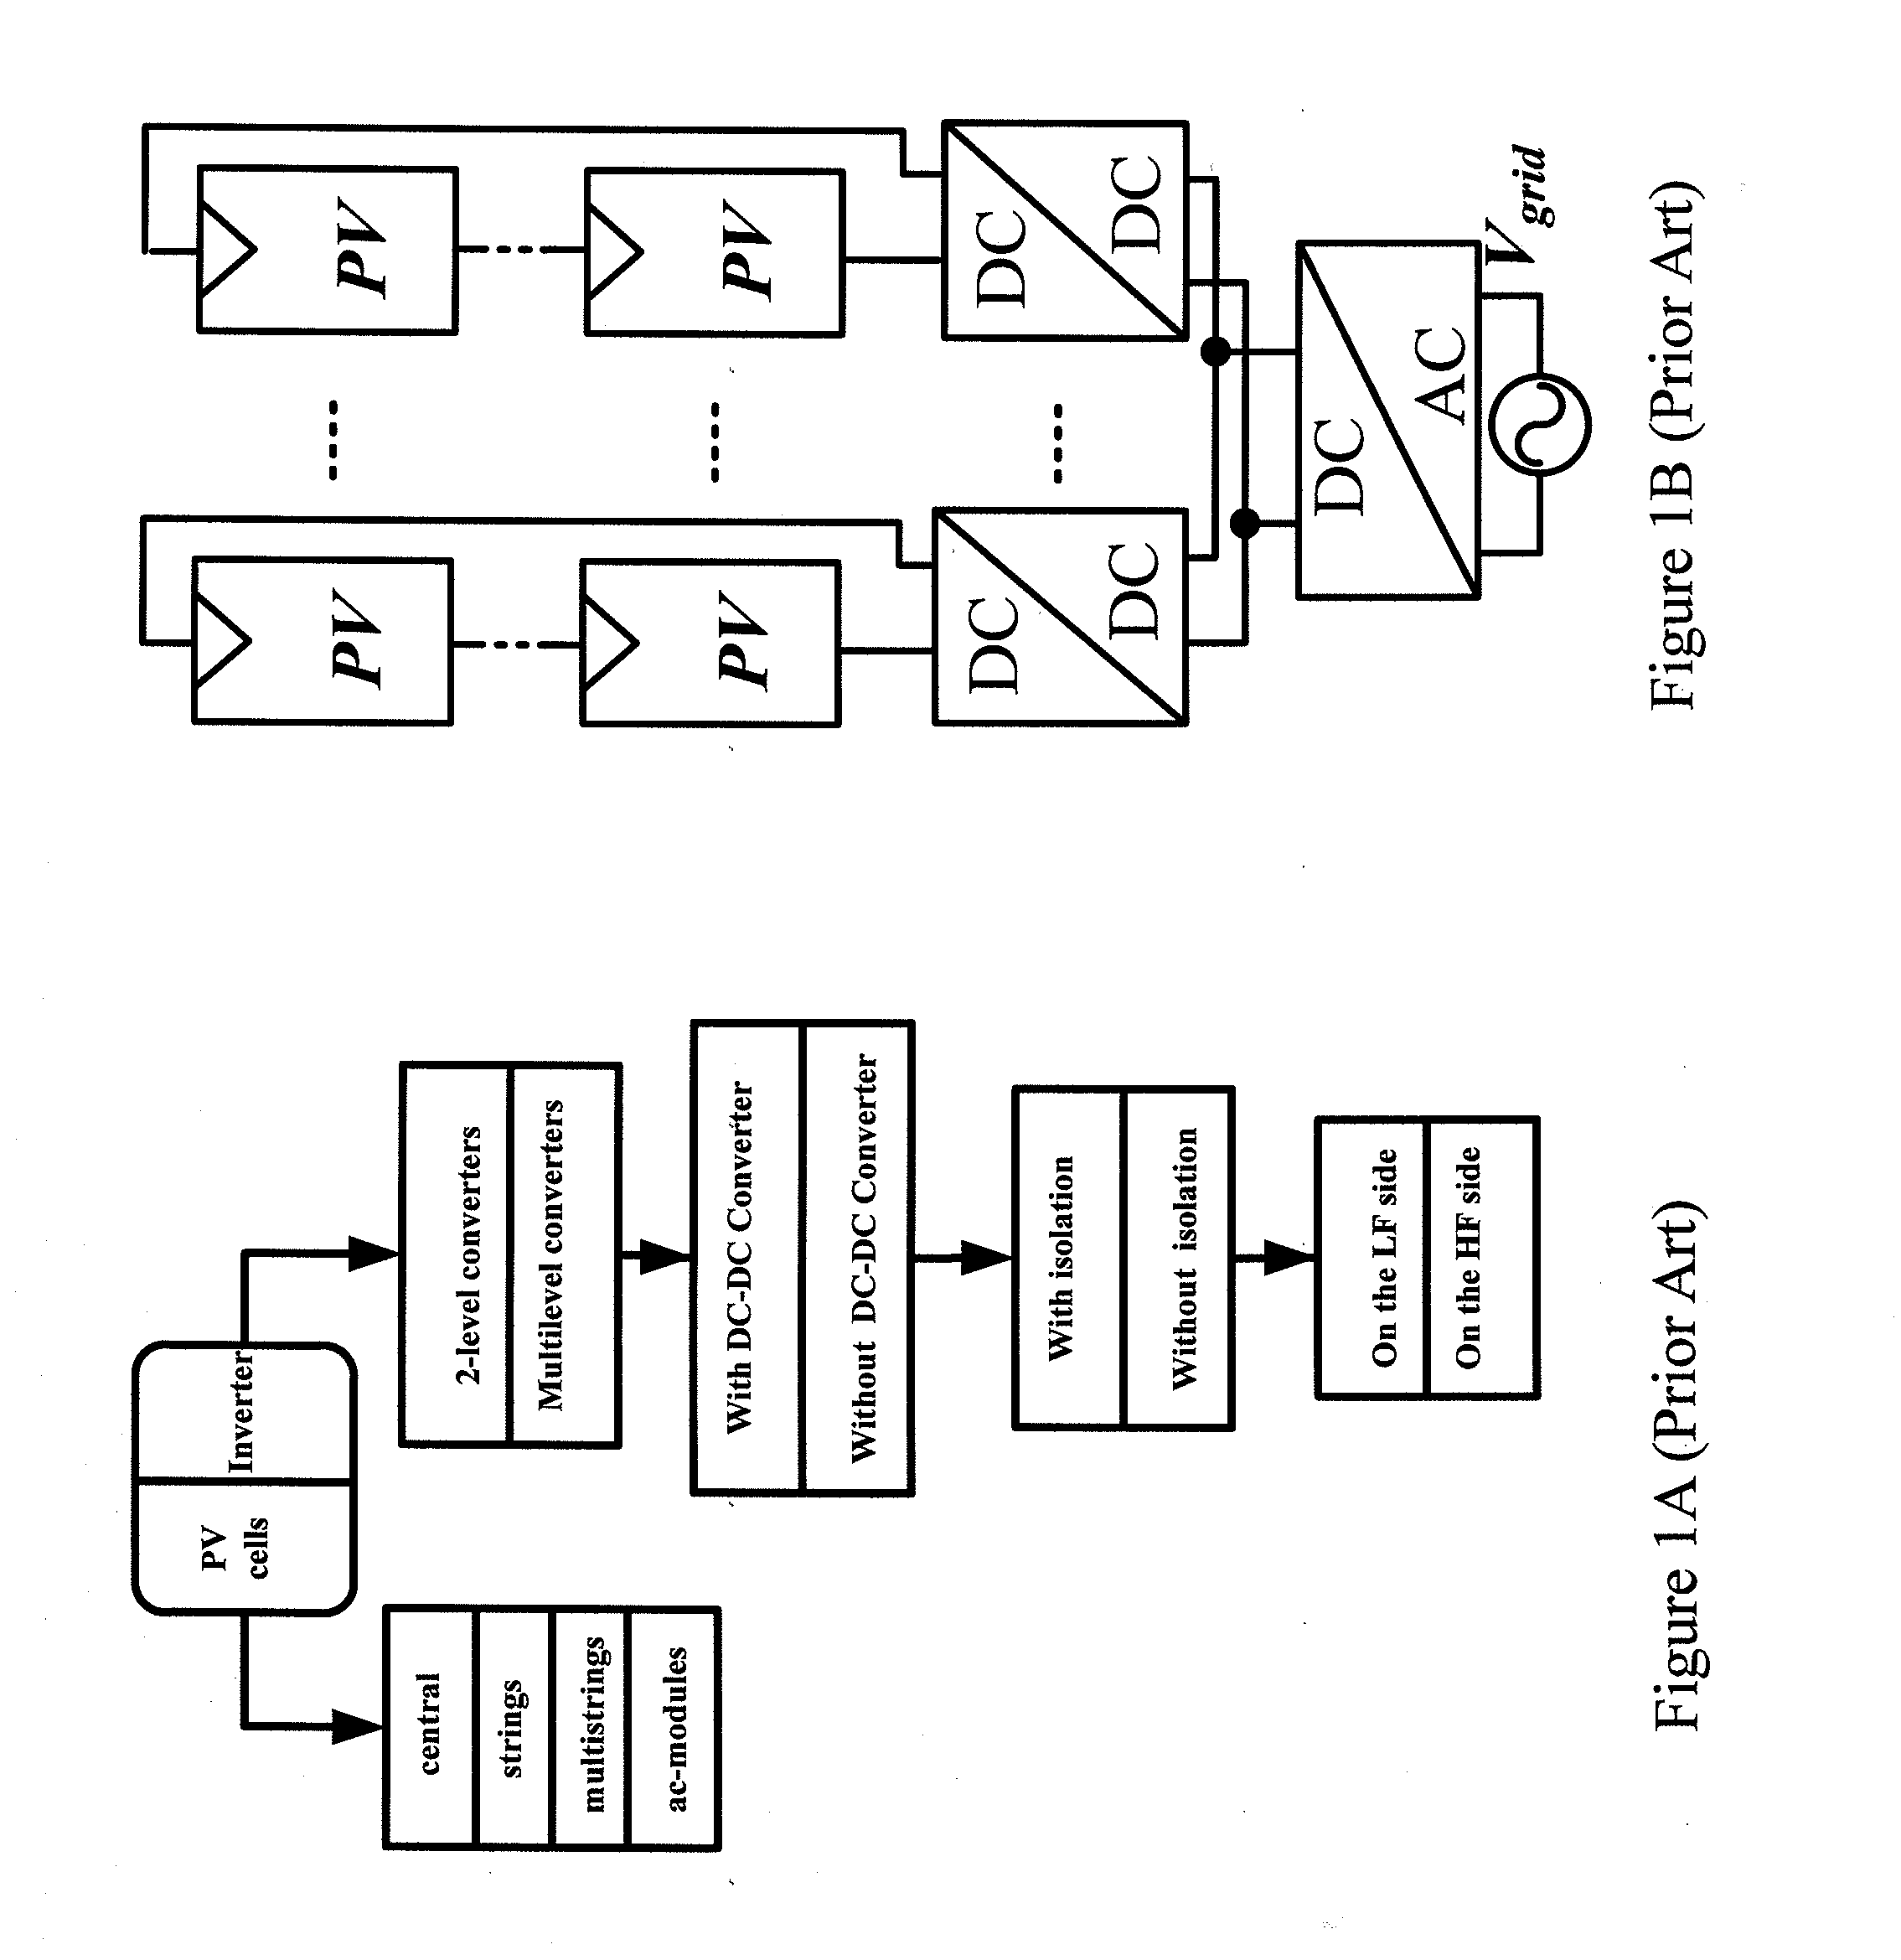 Inverter for a Distributed Power Generator